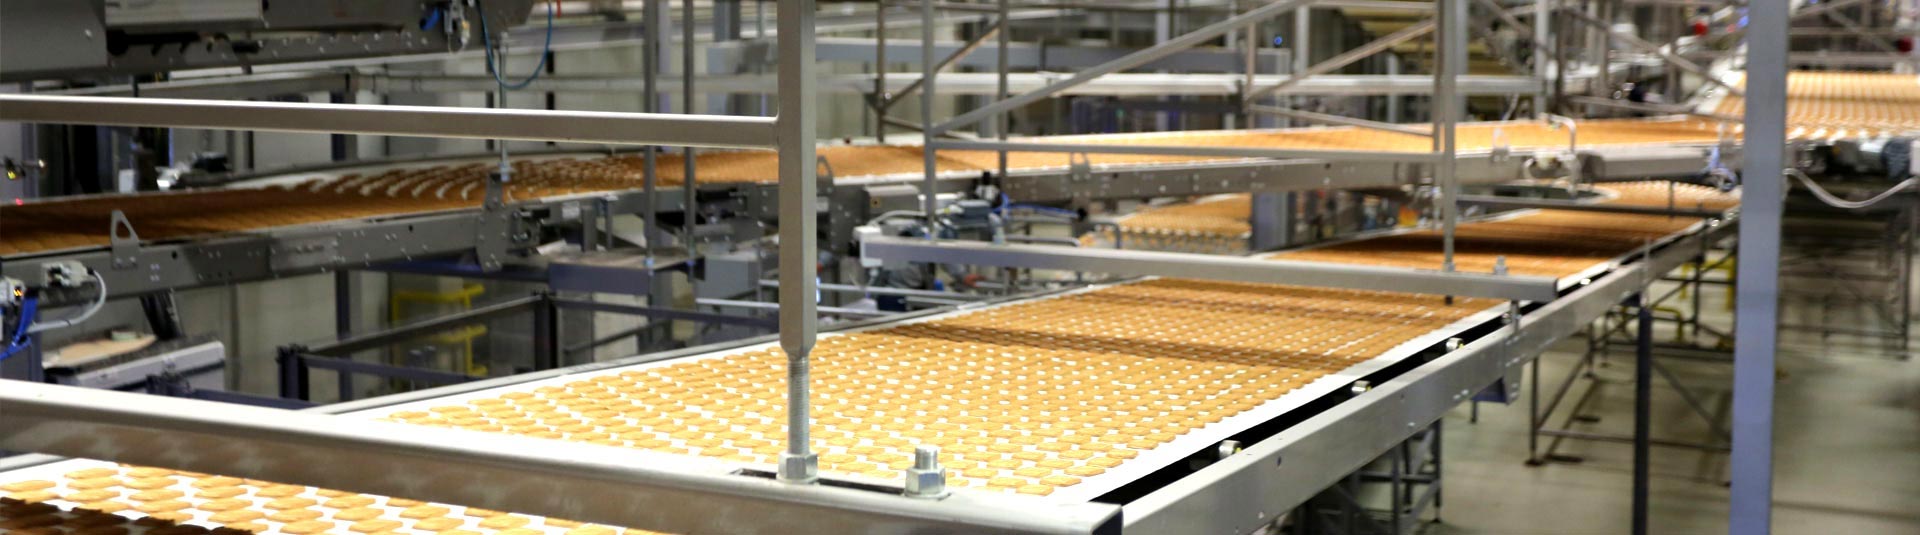 Bakery, Biscuit, Cake and Wafer Production Facility